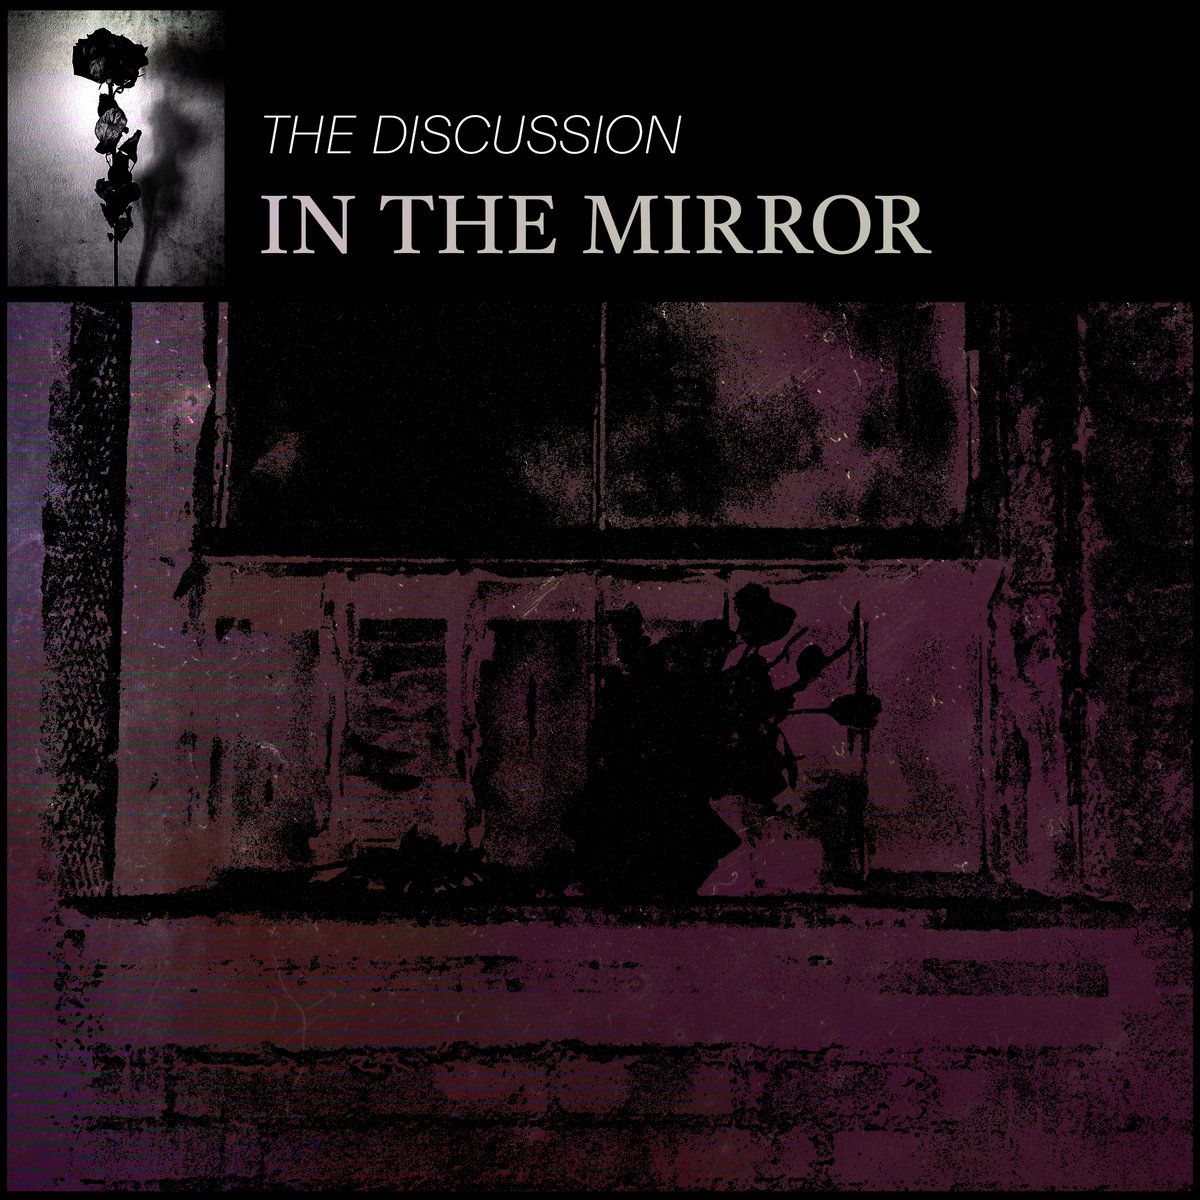 Reflections of Darkness — Los Angeles Post-Punk Project The Discussion Debuts Video for “In the Mirror”